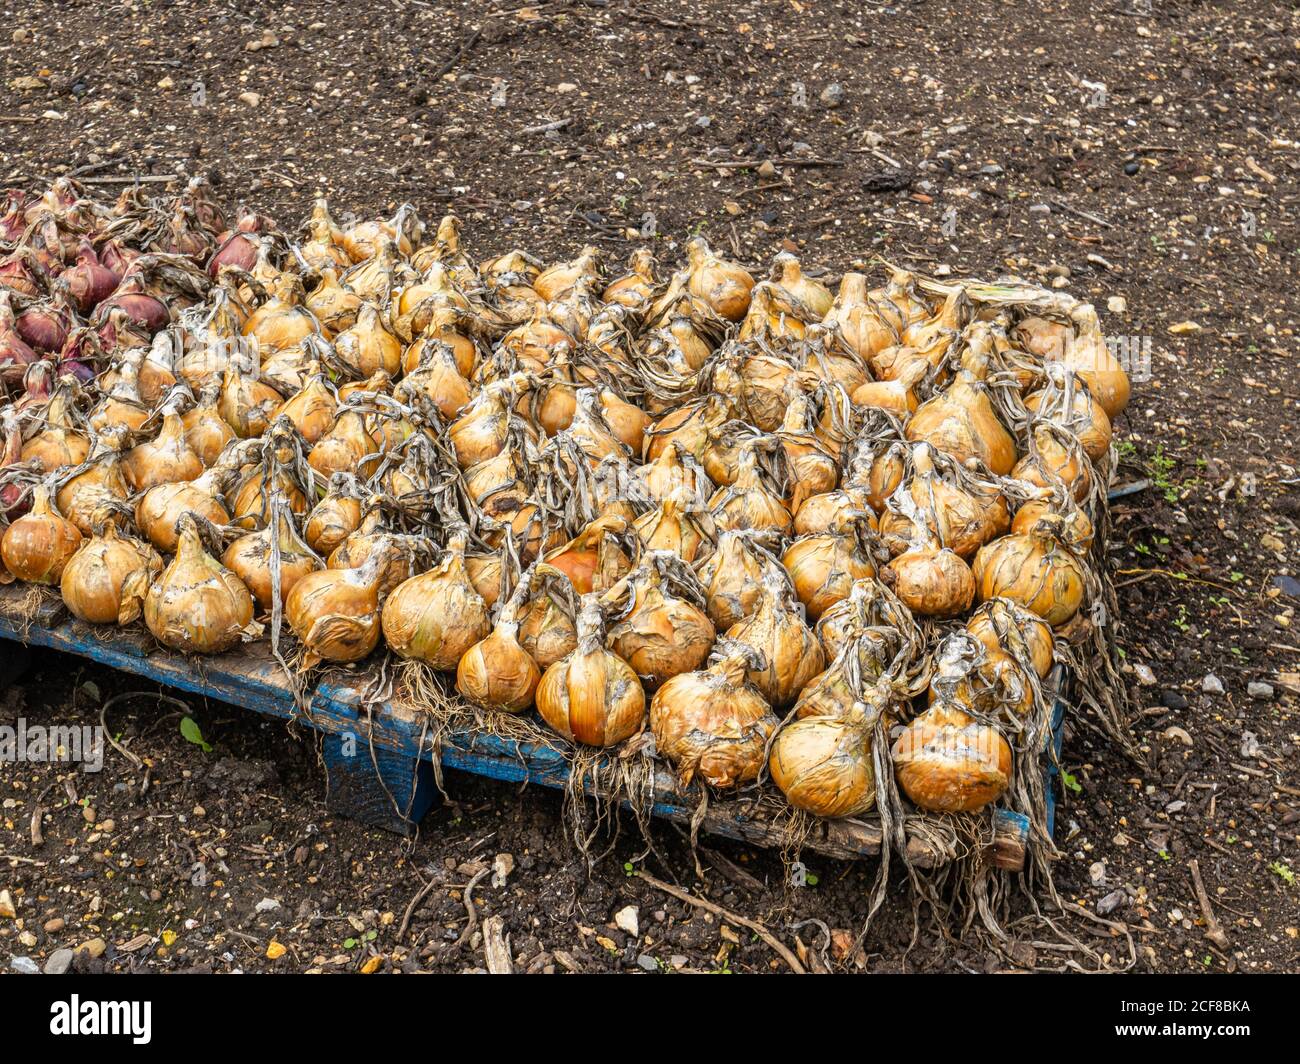 Onions growing and lifted to dry after harvesting in a kitchen garden, Hampshire, southern England in late summer / early autumn Stock Photo